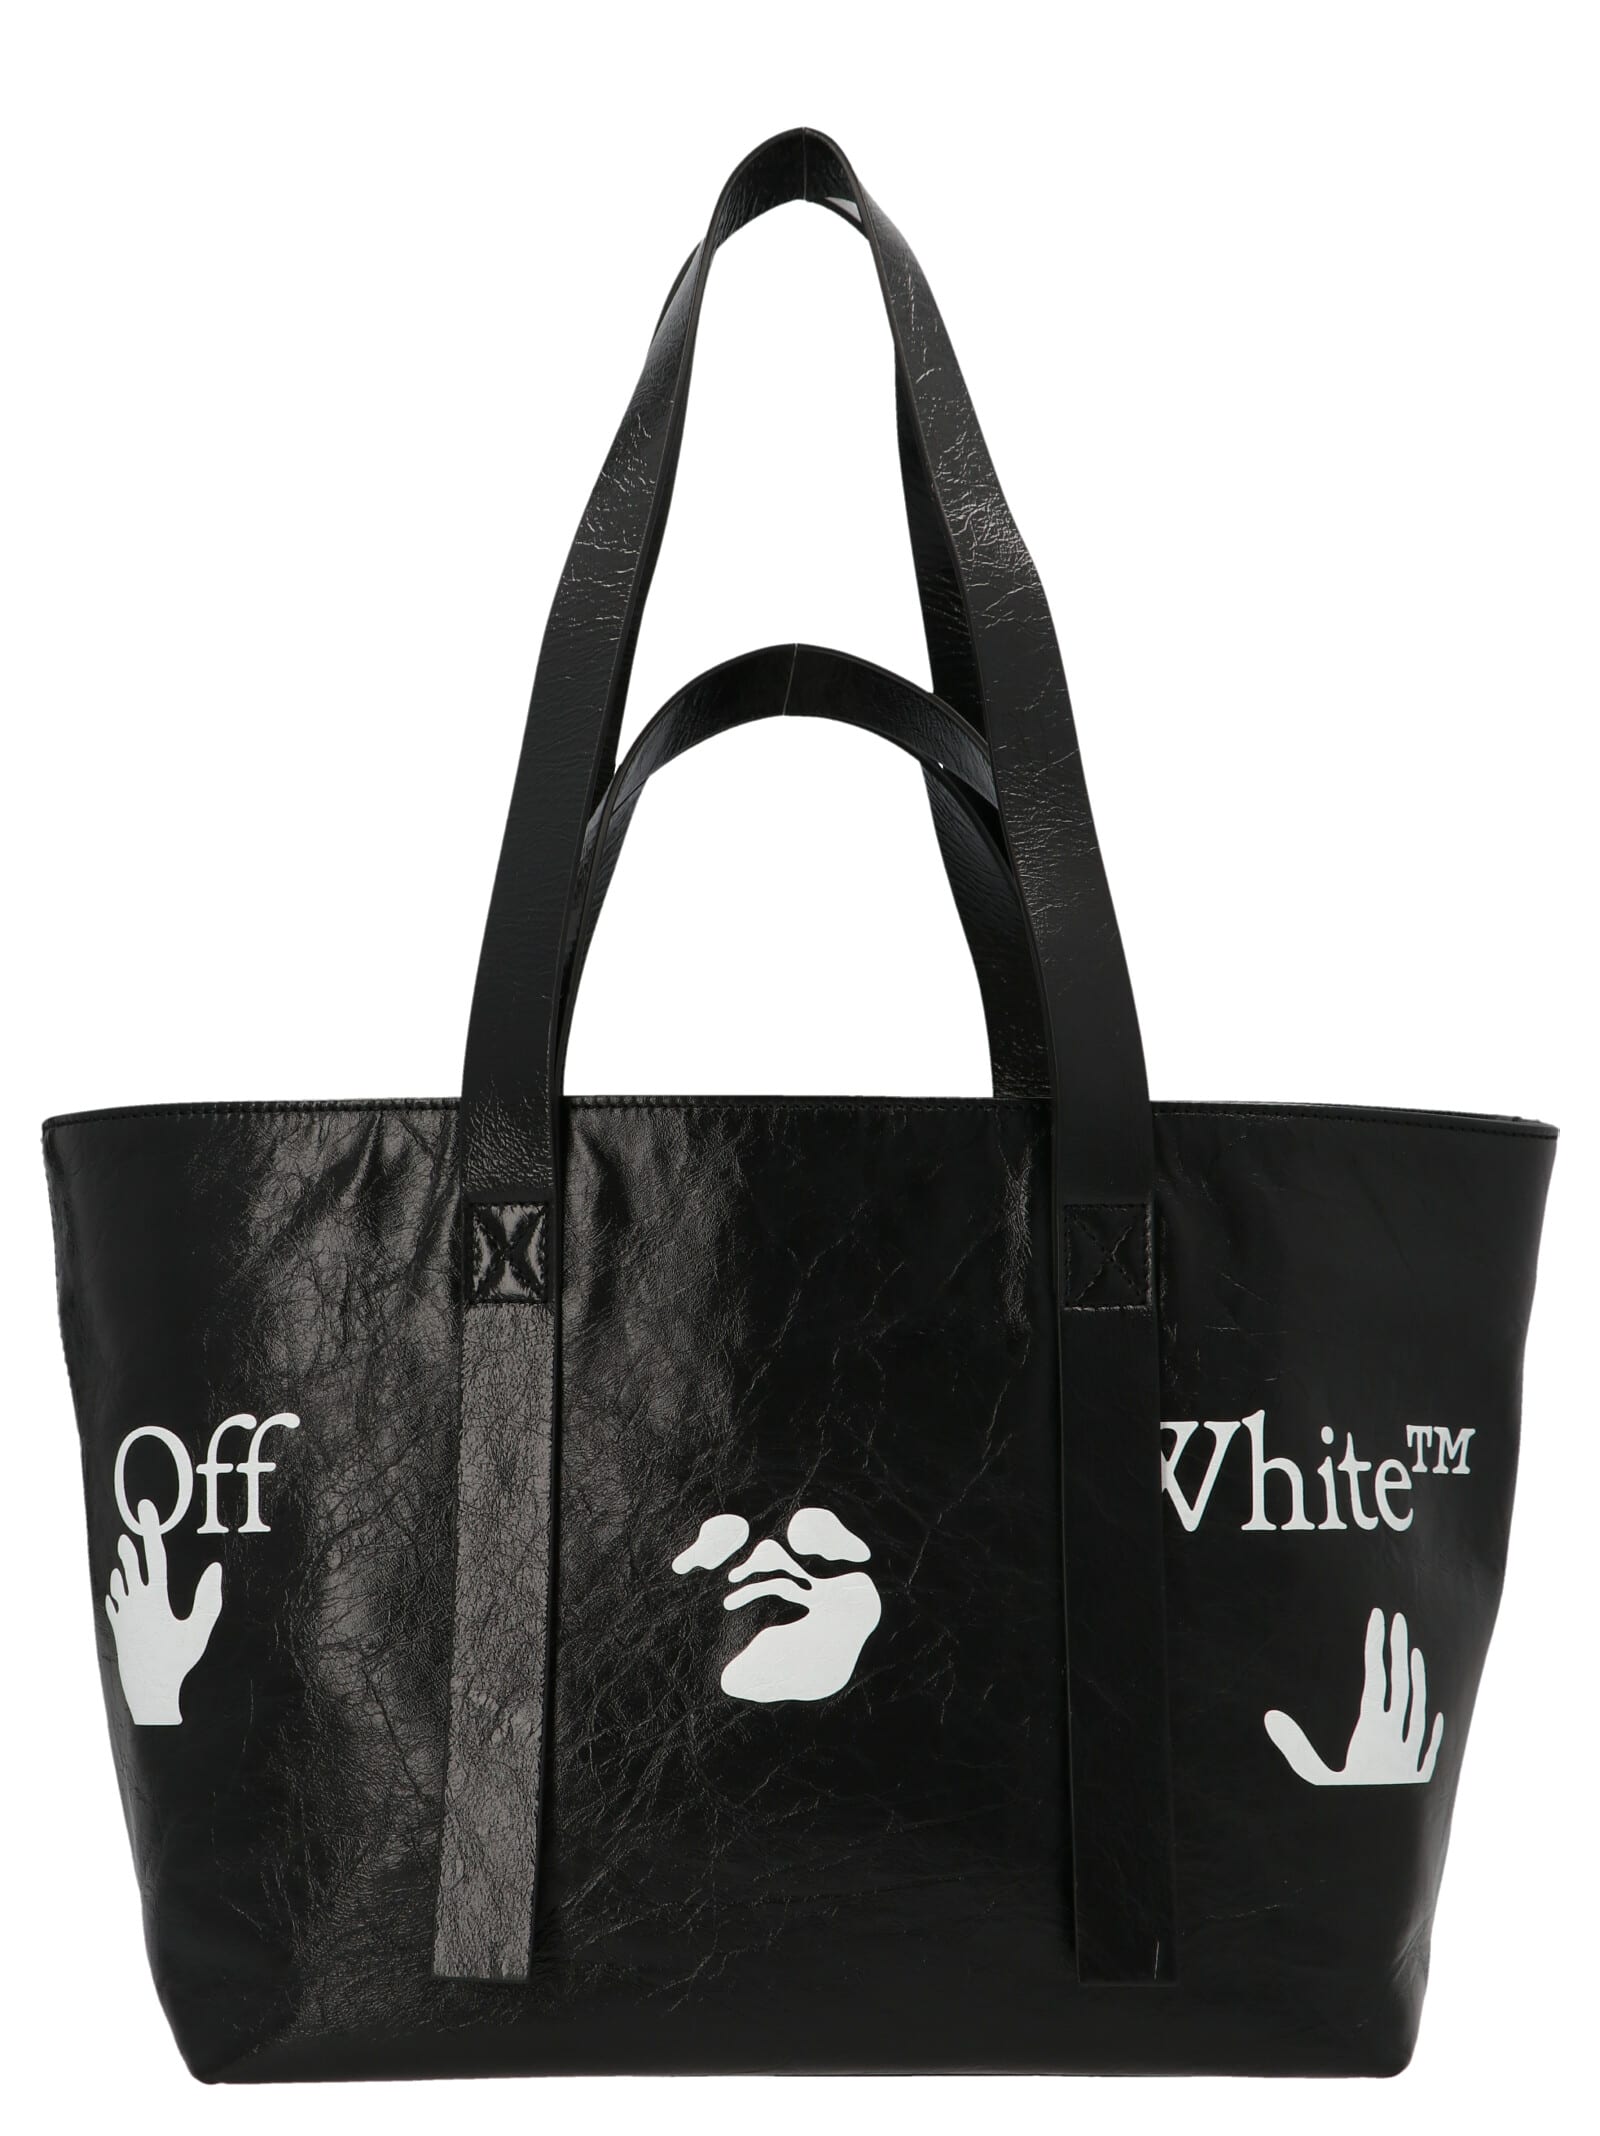 OFF-WHITE OFF-WHITE COMMERCIAL TOTE 45 BAG,OWNA143S21LEA0011001 1001